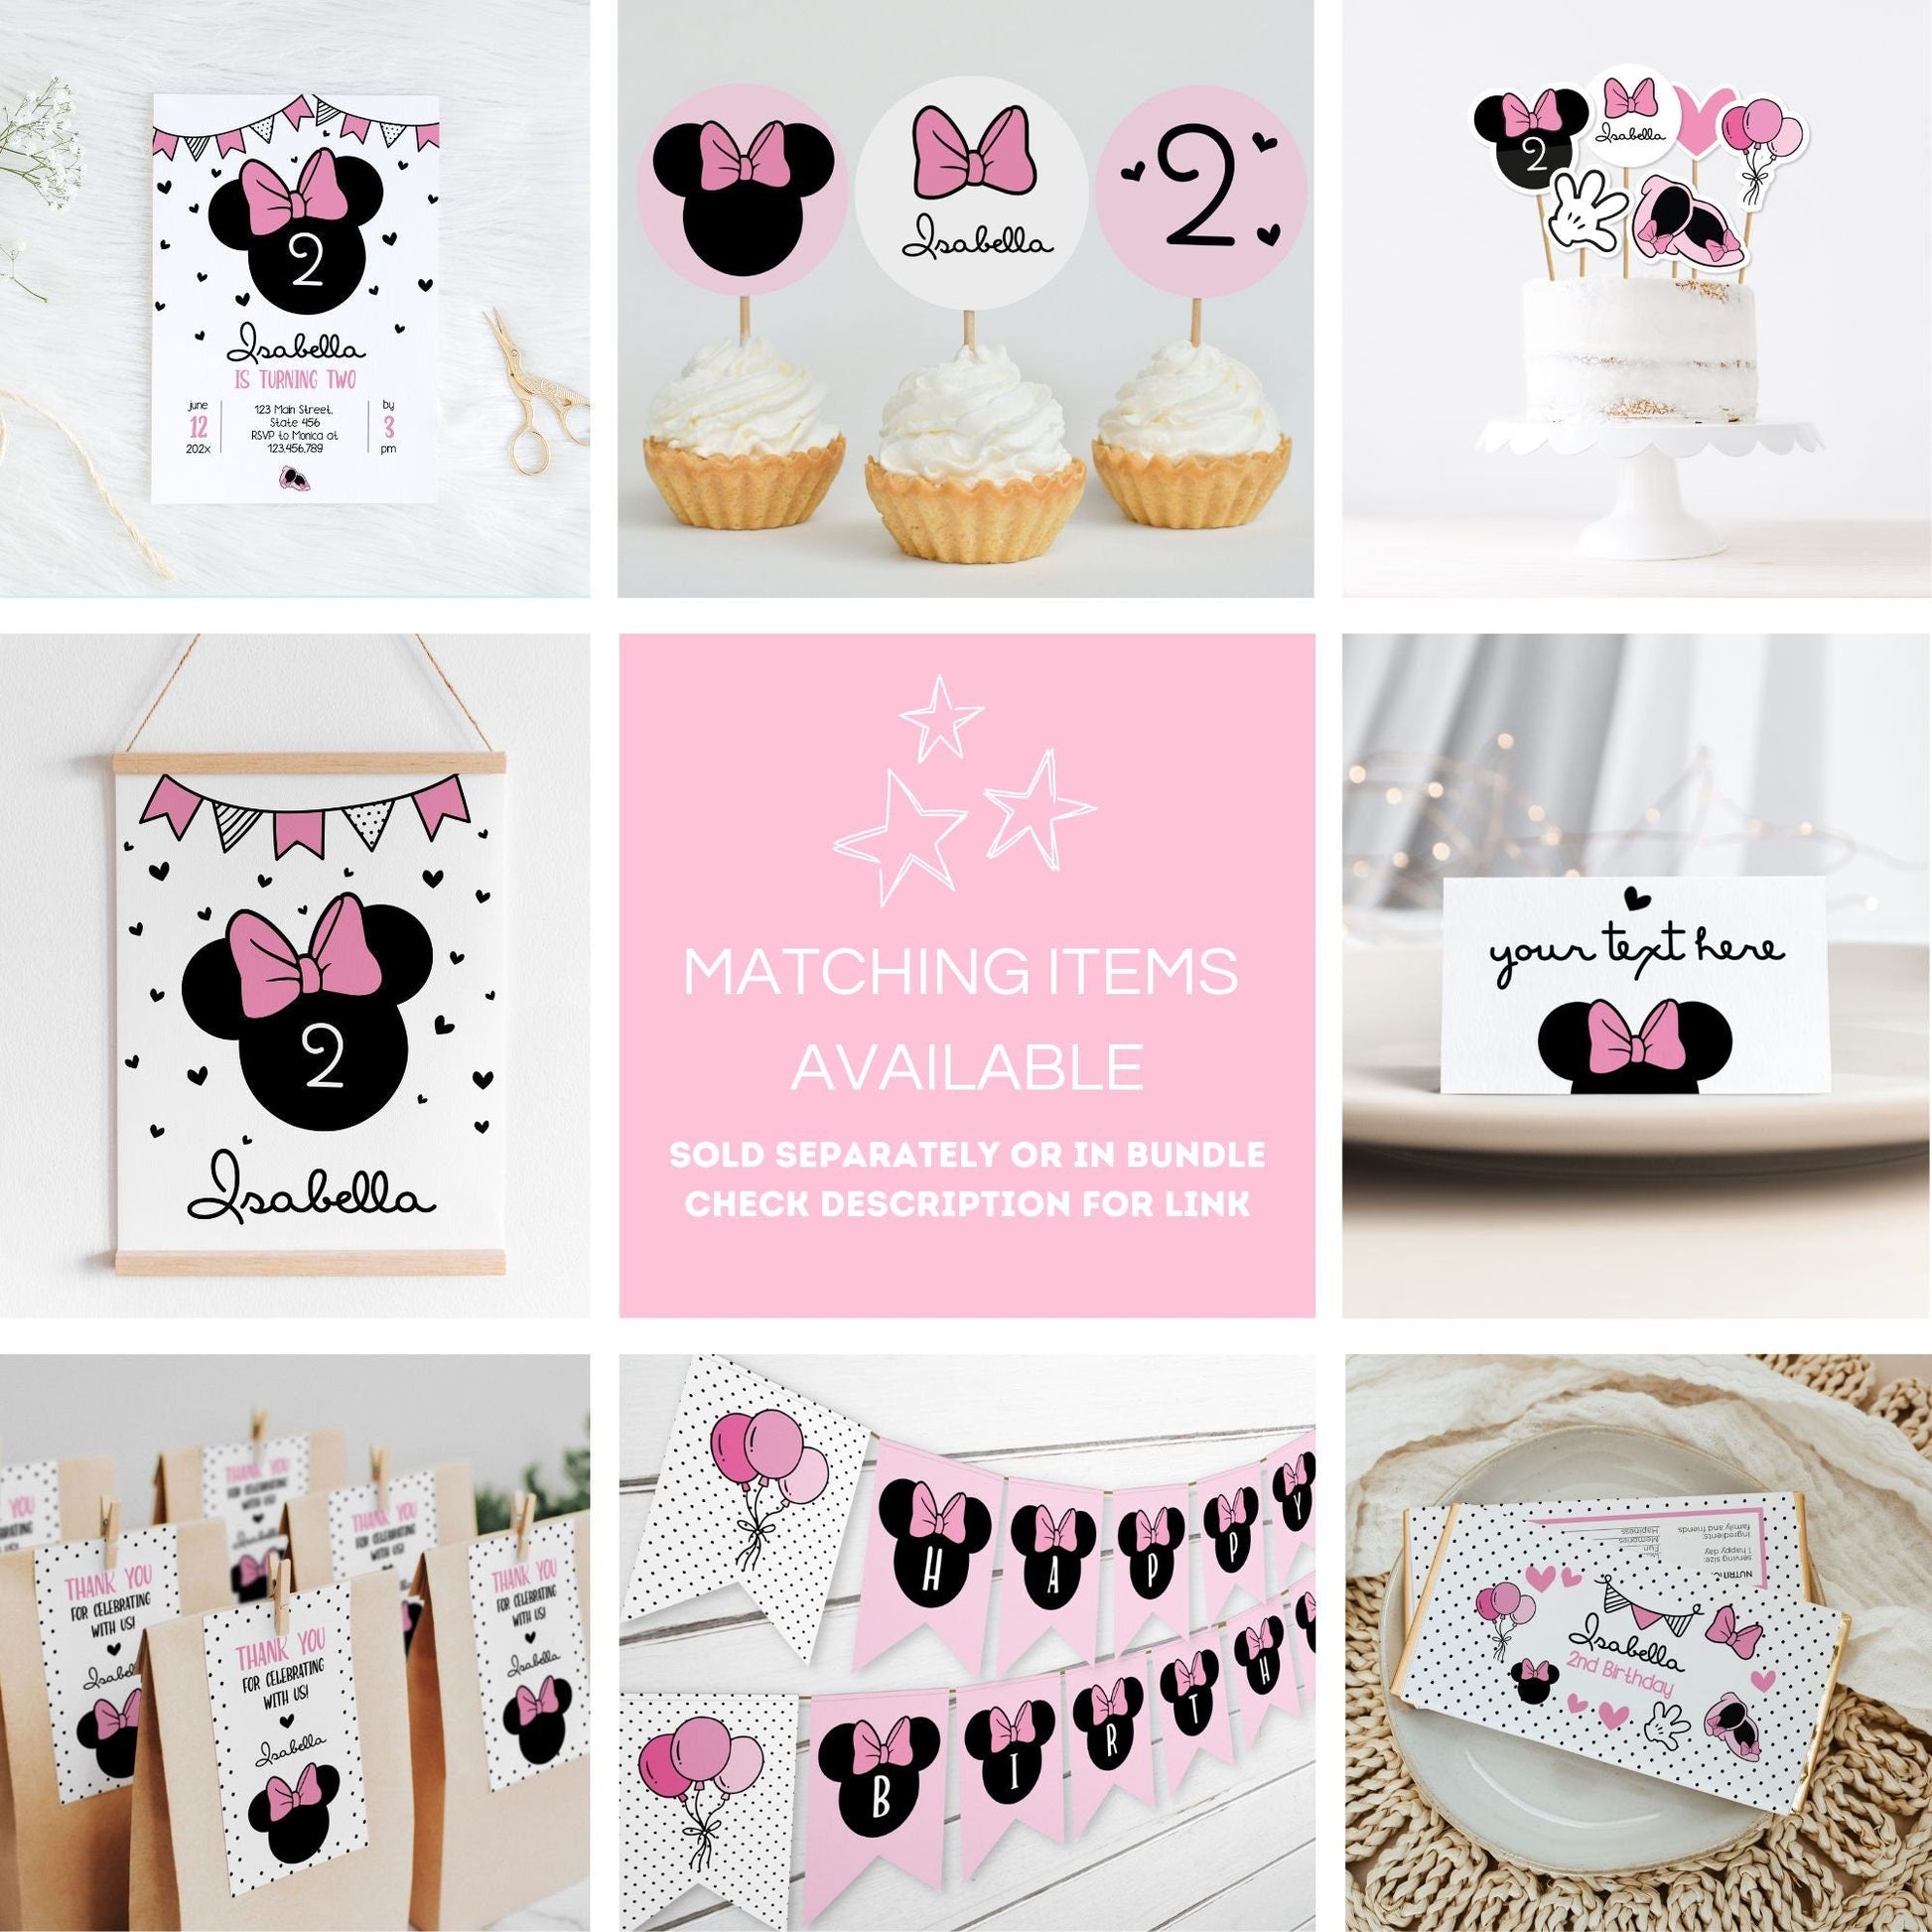 Minnie Mouse Pink Thank You Tag ☆ Instant Download